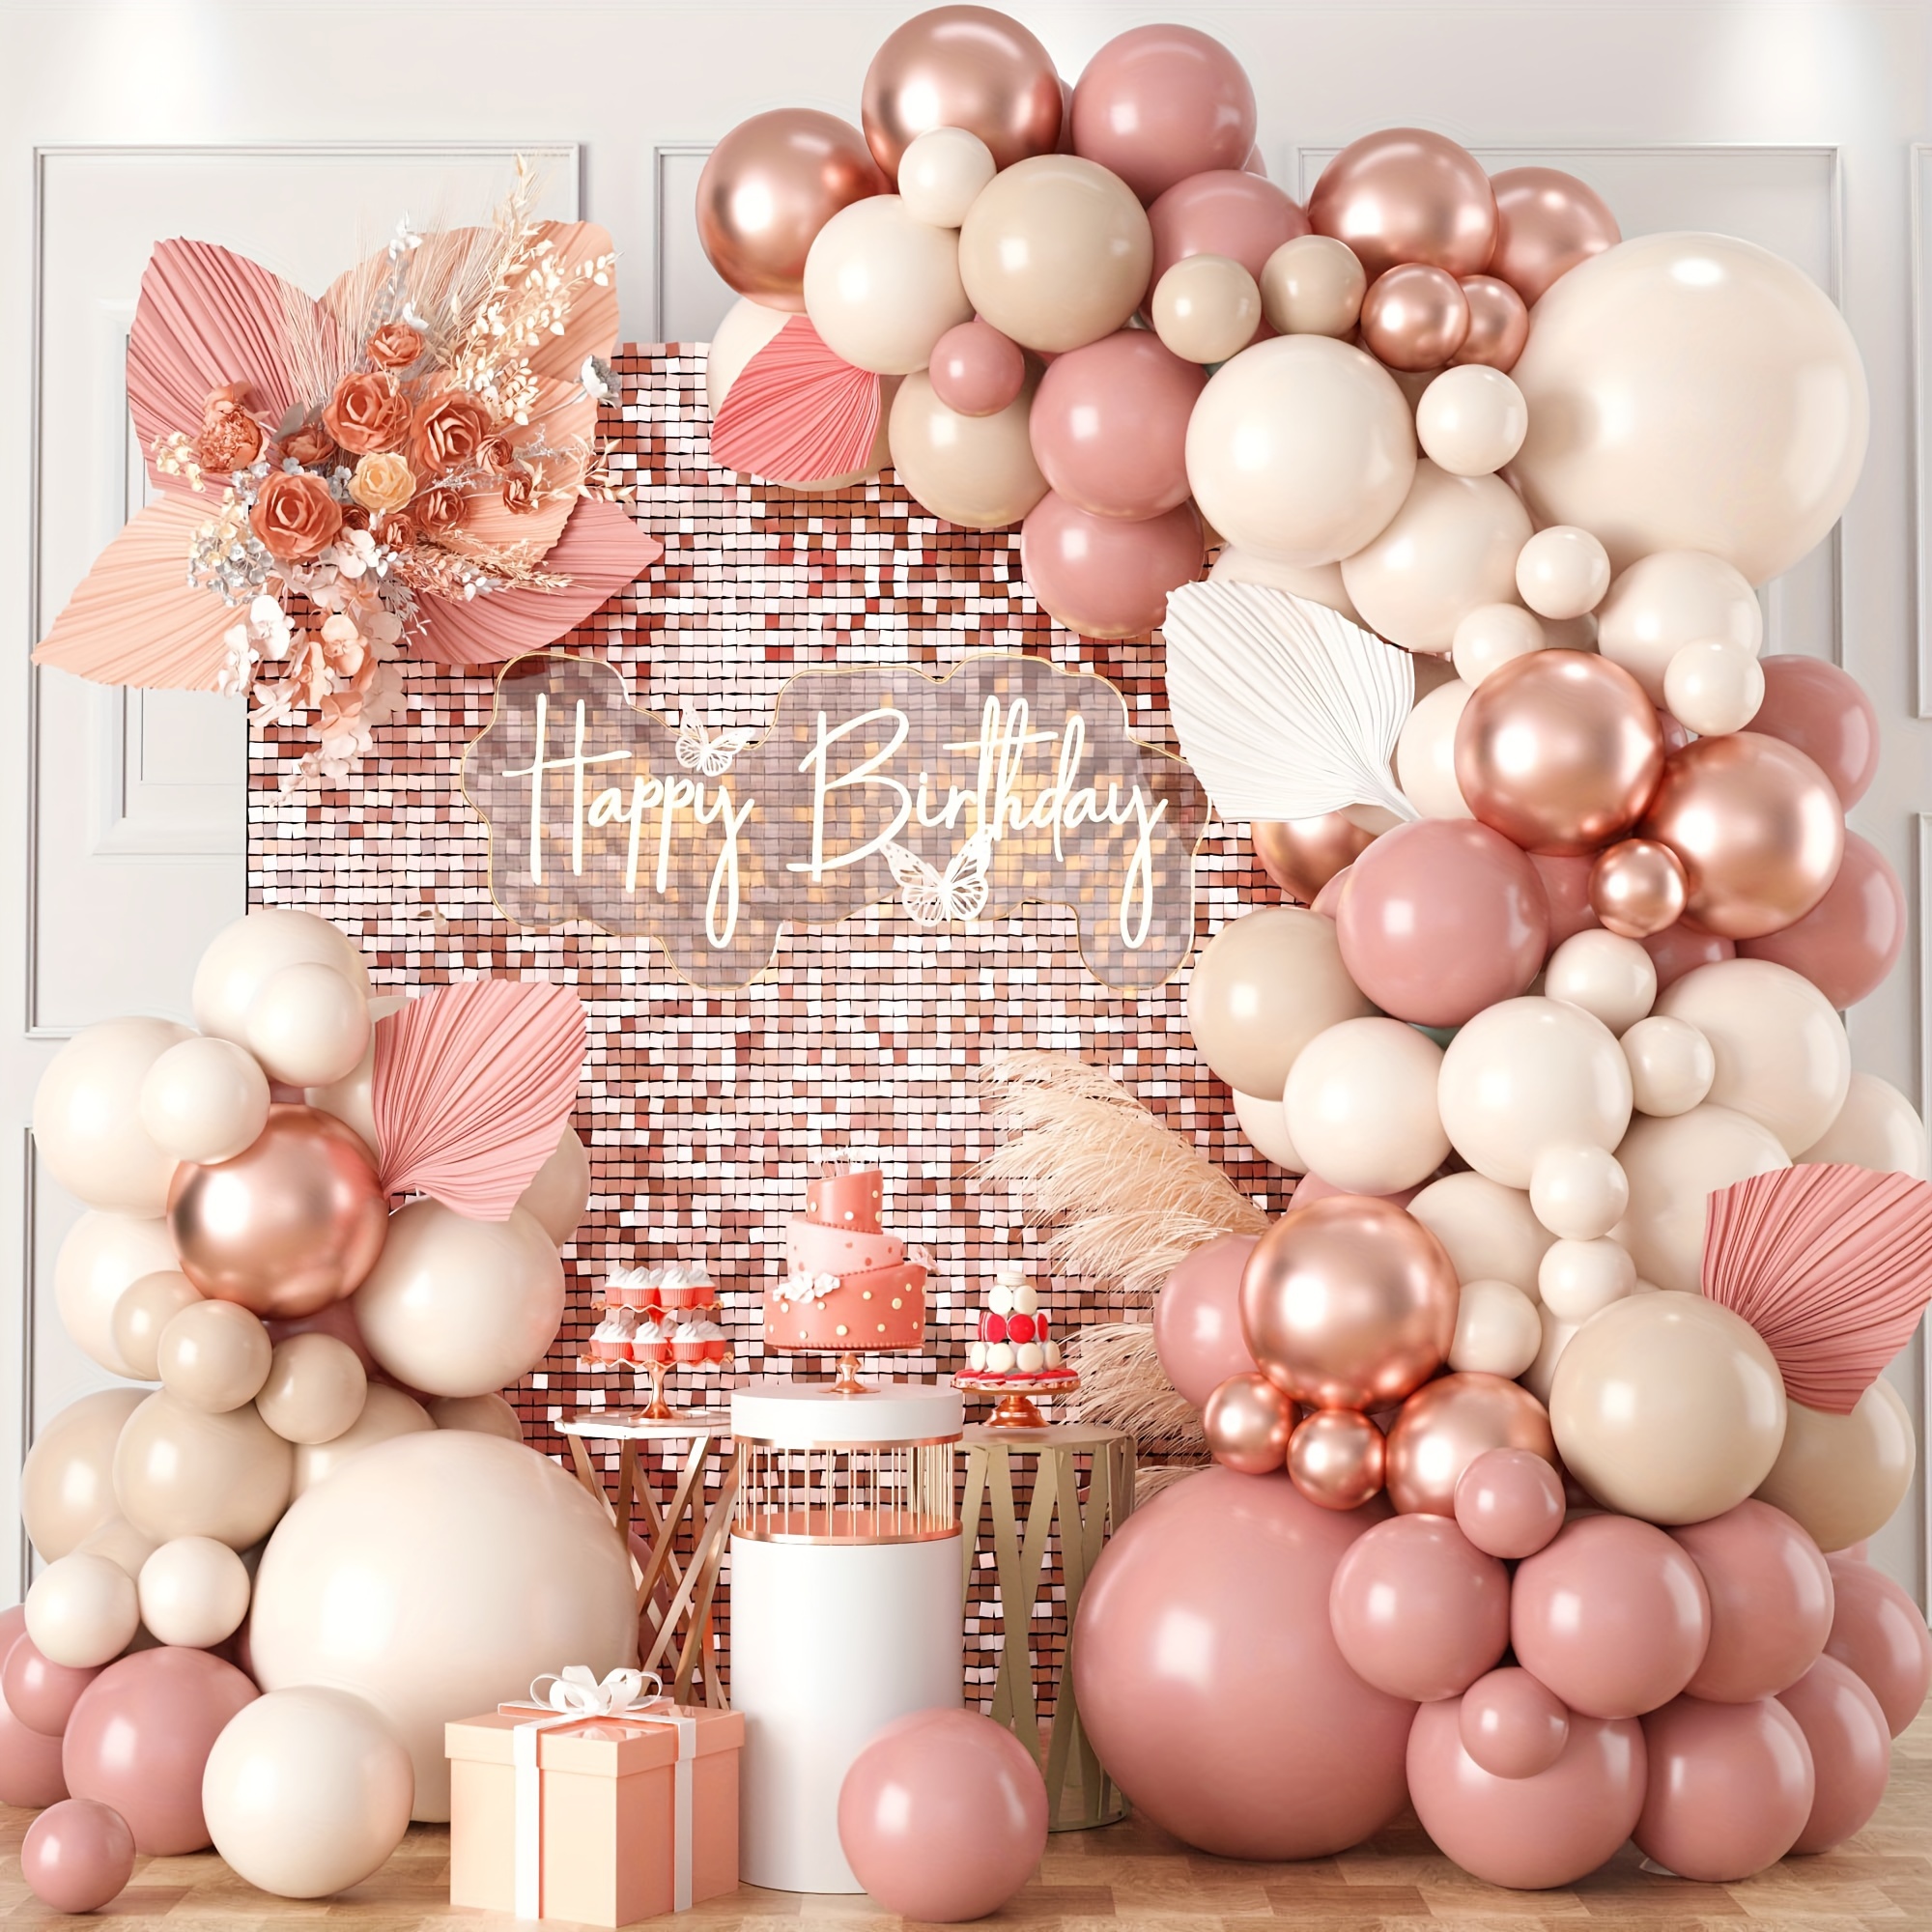 

94pcs Nude Balloon Arch Garland Kit. With Rose Golden Apricot Dusty Pink Latex Balloon Sand White Cream Balloon For Birthday Wedding Valentine's Day Bridal Shower Anniversary Bar Decoration